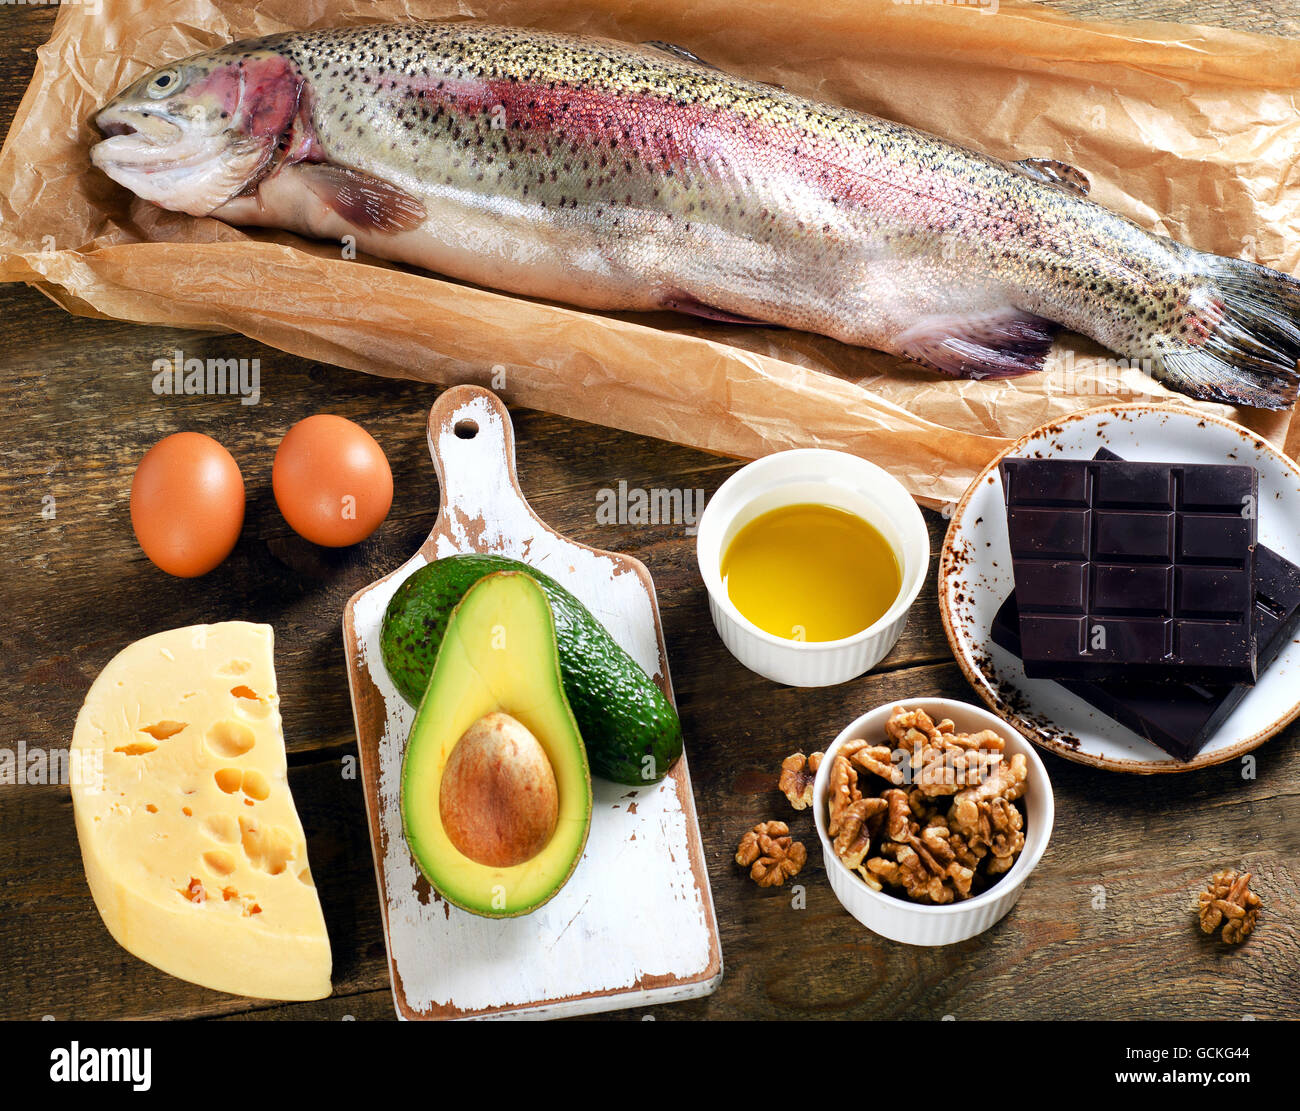 High Fat Foods That Are Healthy. Top view Stock Photo